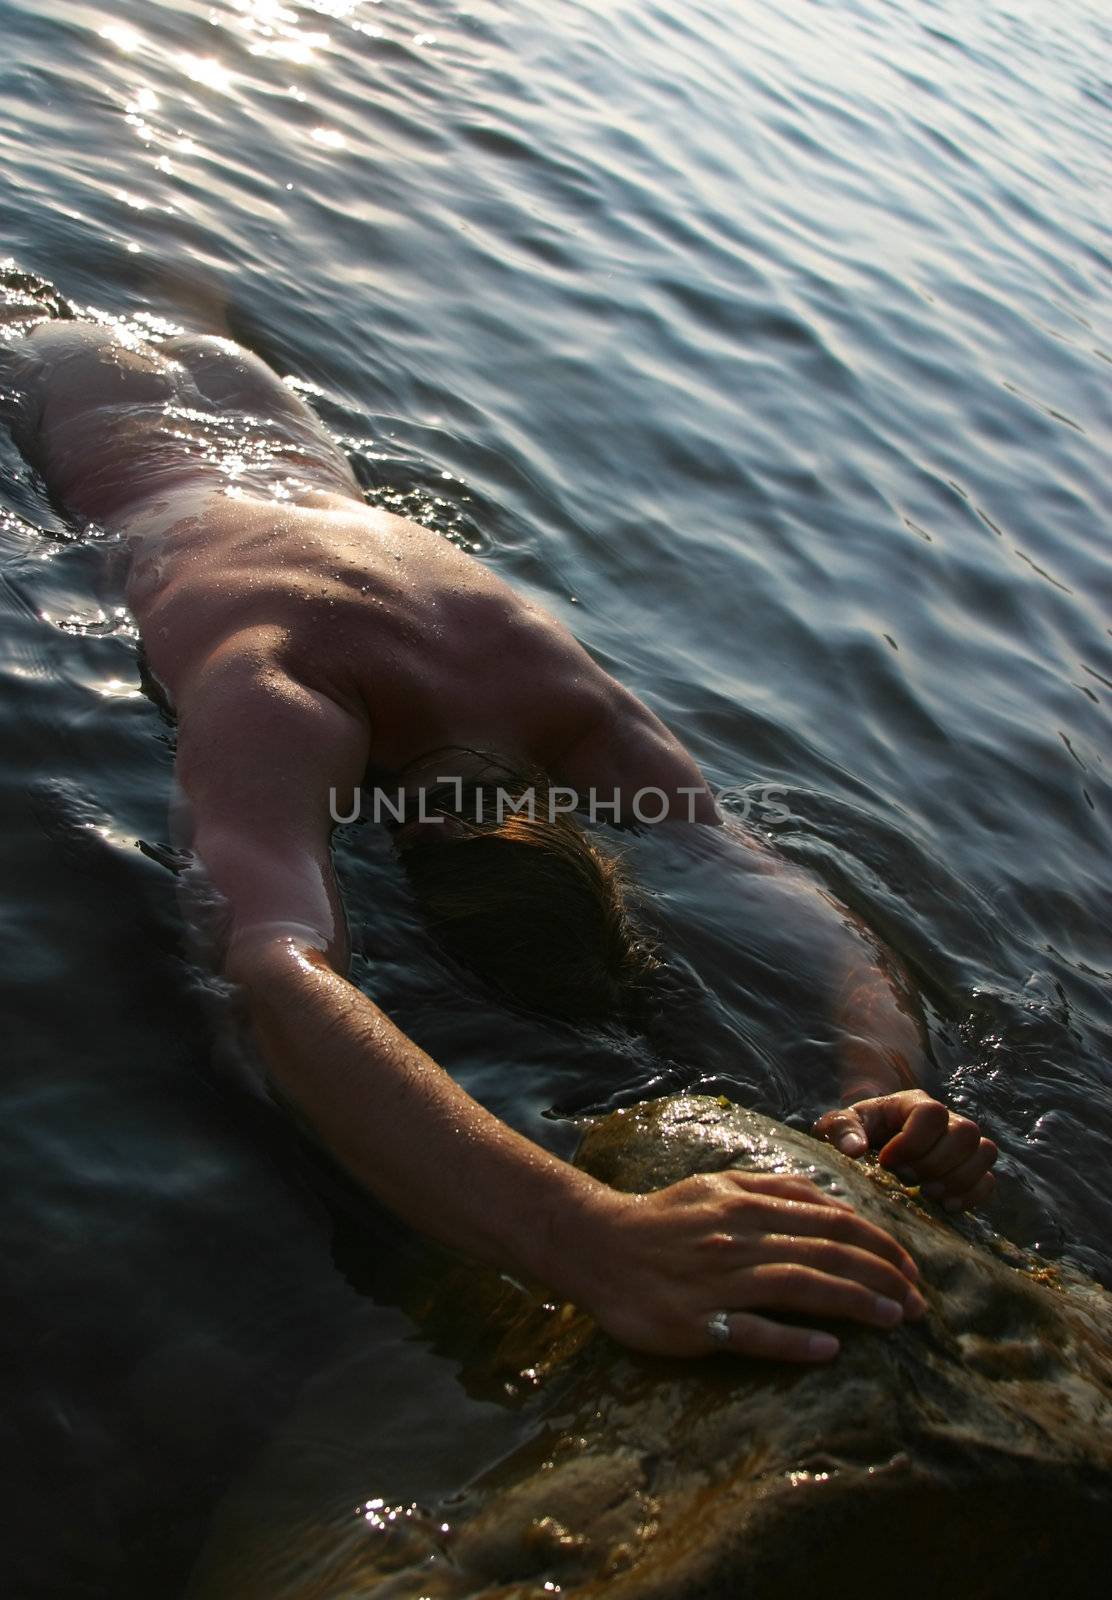 The man with a beautiful body in water